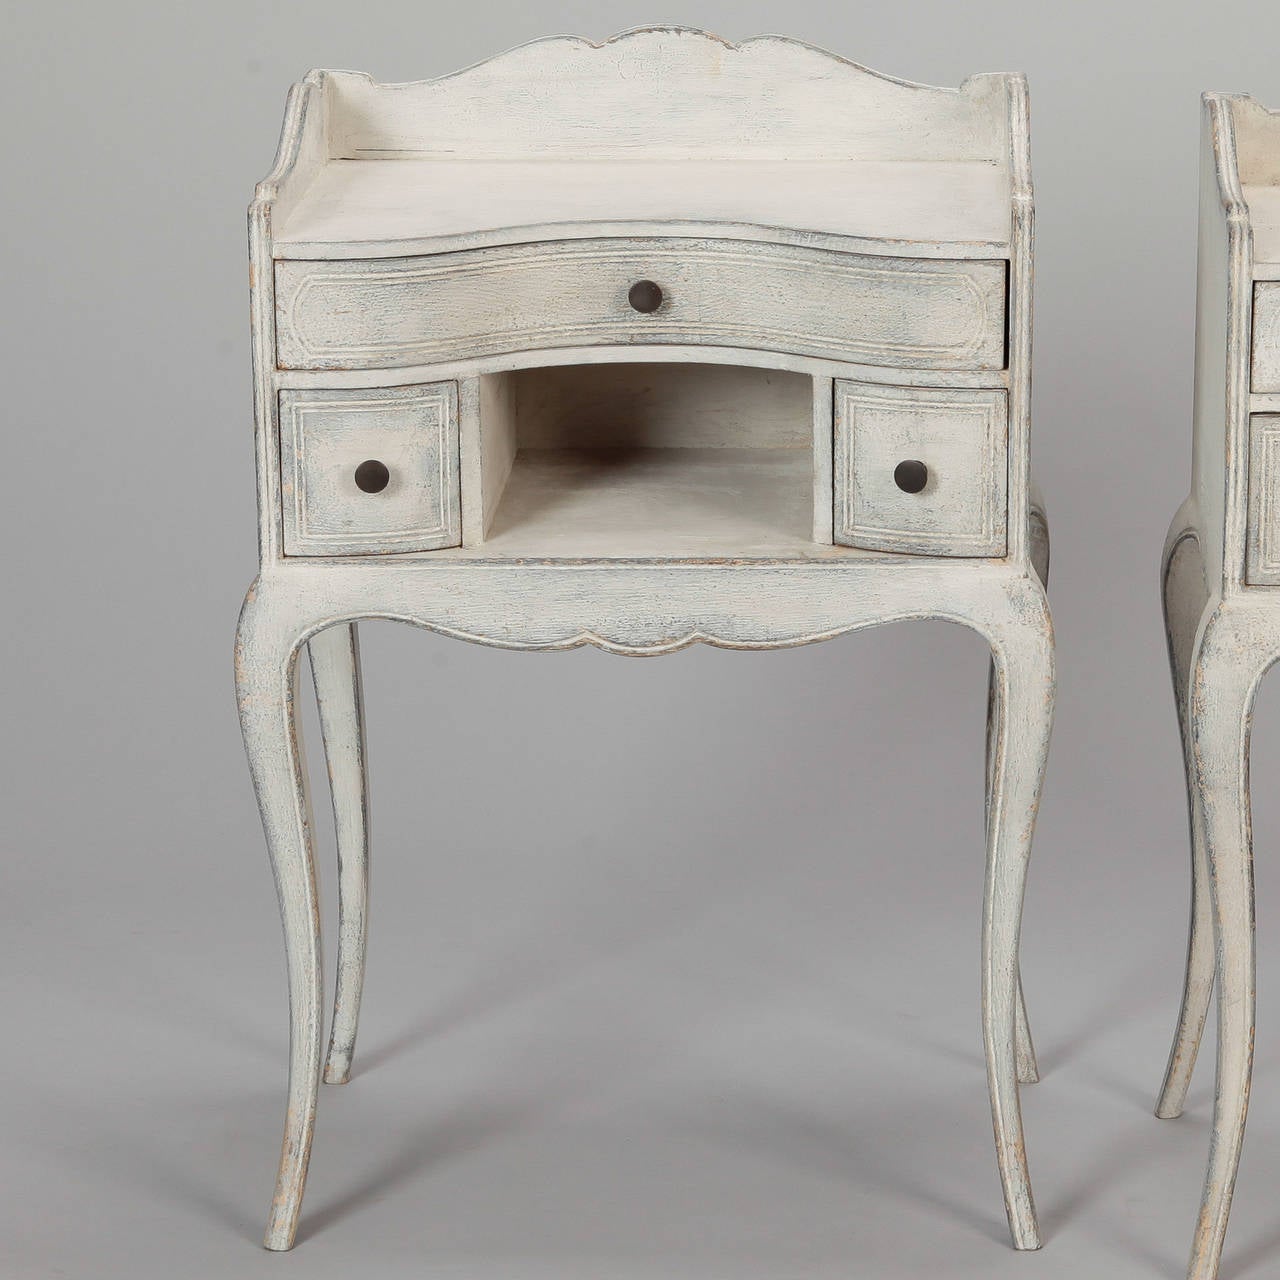 Circa 1920s pair night tables with antique white painted finish, cabriole legs, curved fronts and three small drawers. Sold and priced as a pair.

Tall Point - Back Scallop:  27.5”
Shelf Ht:  24”